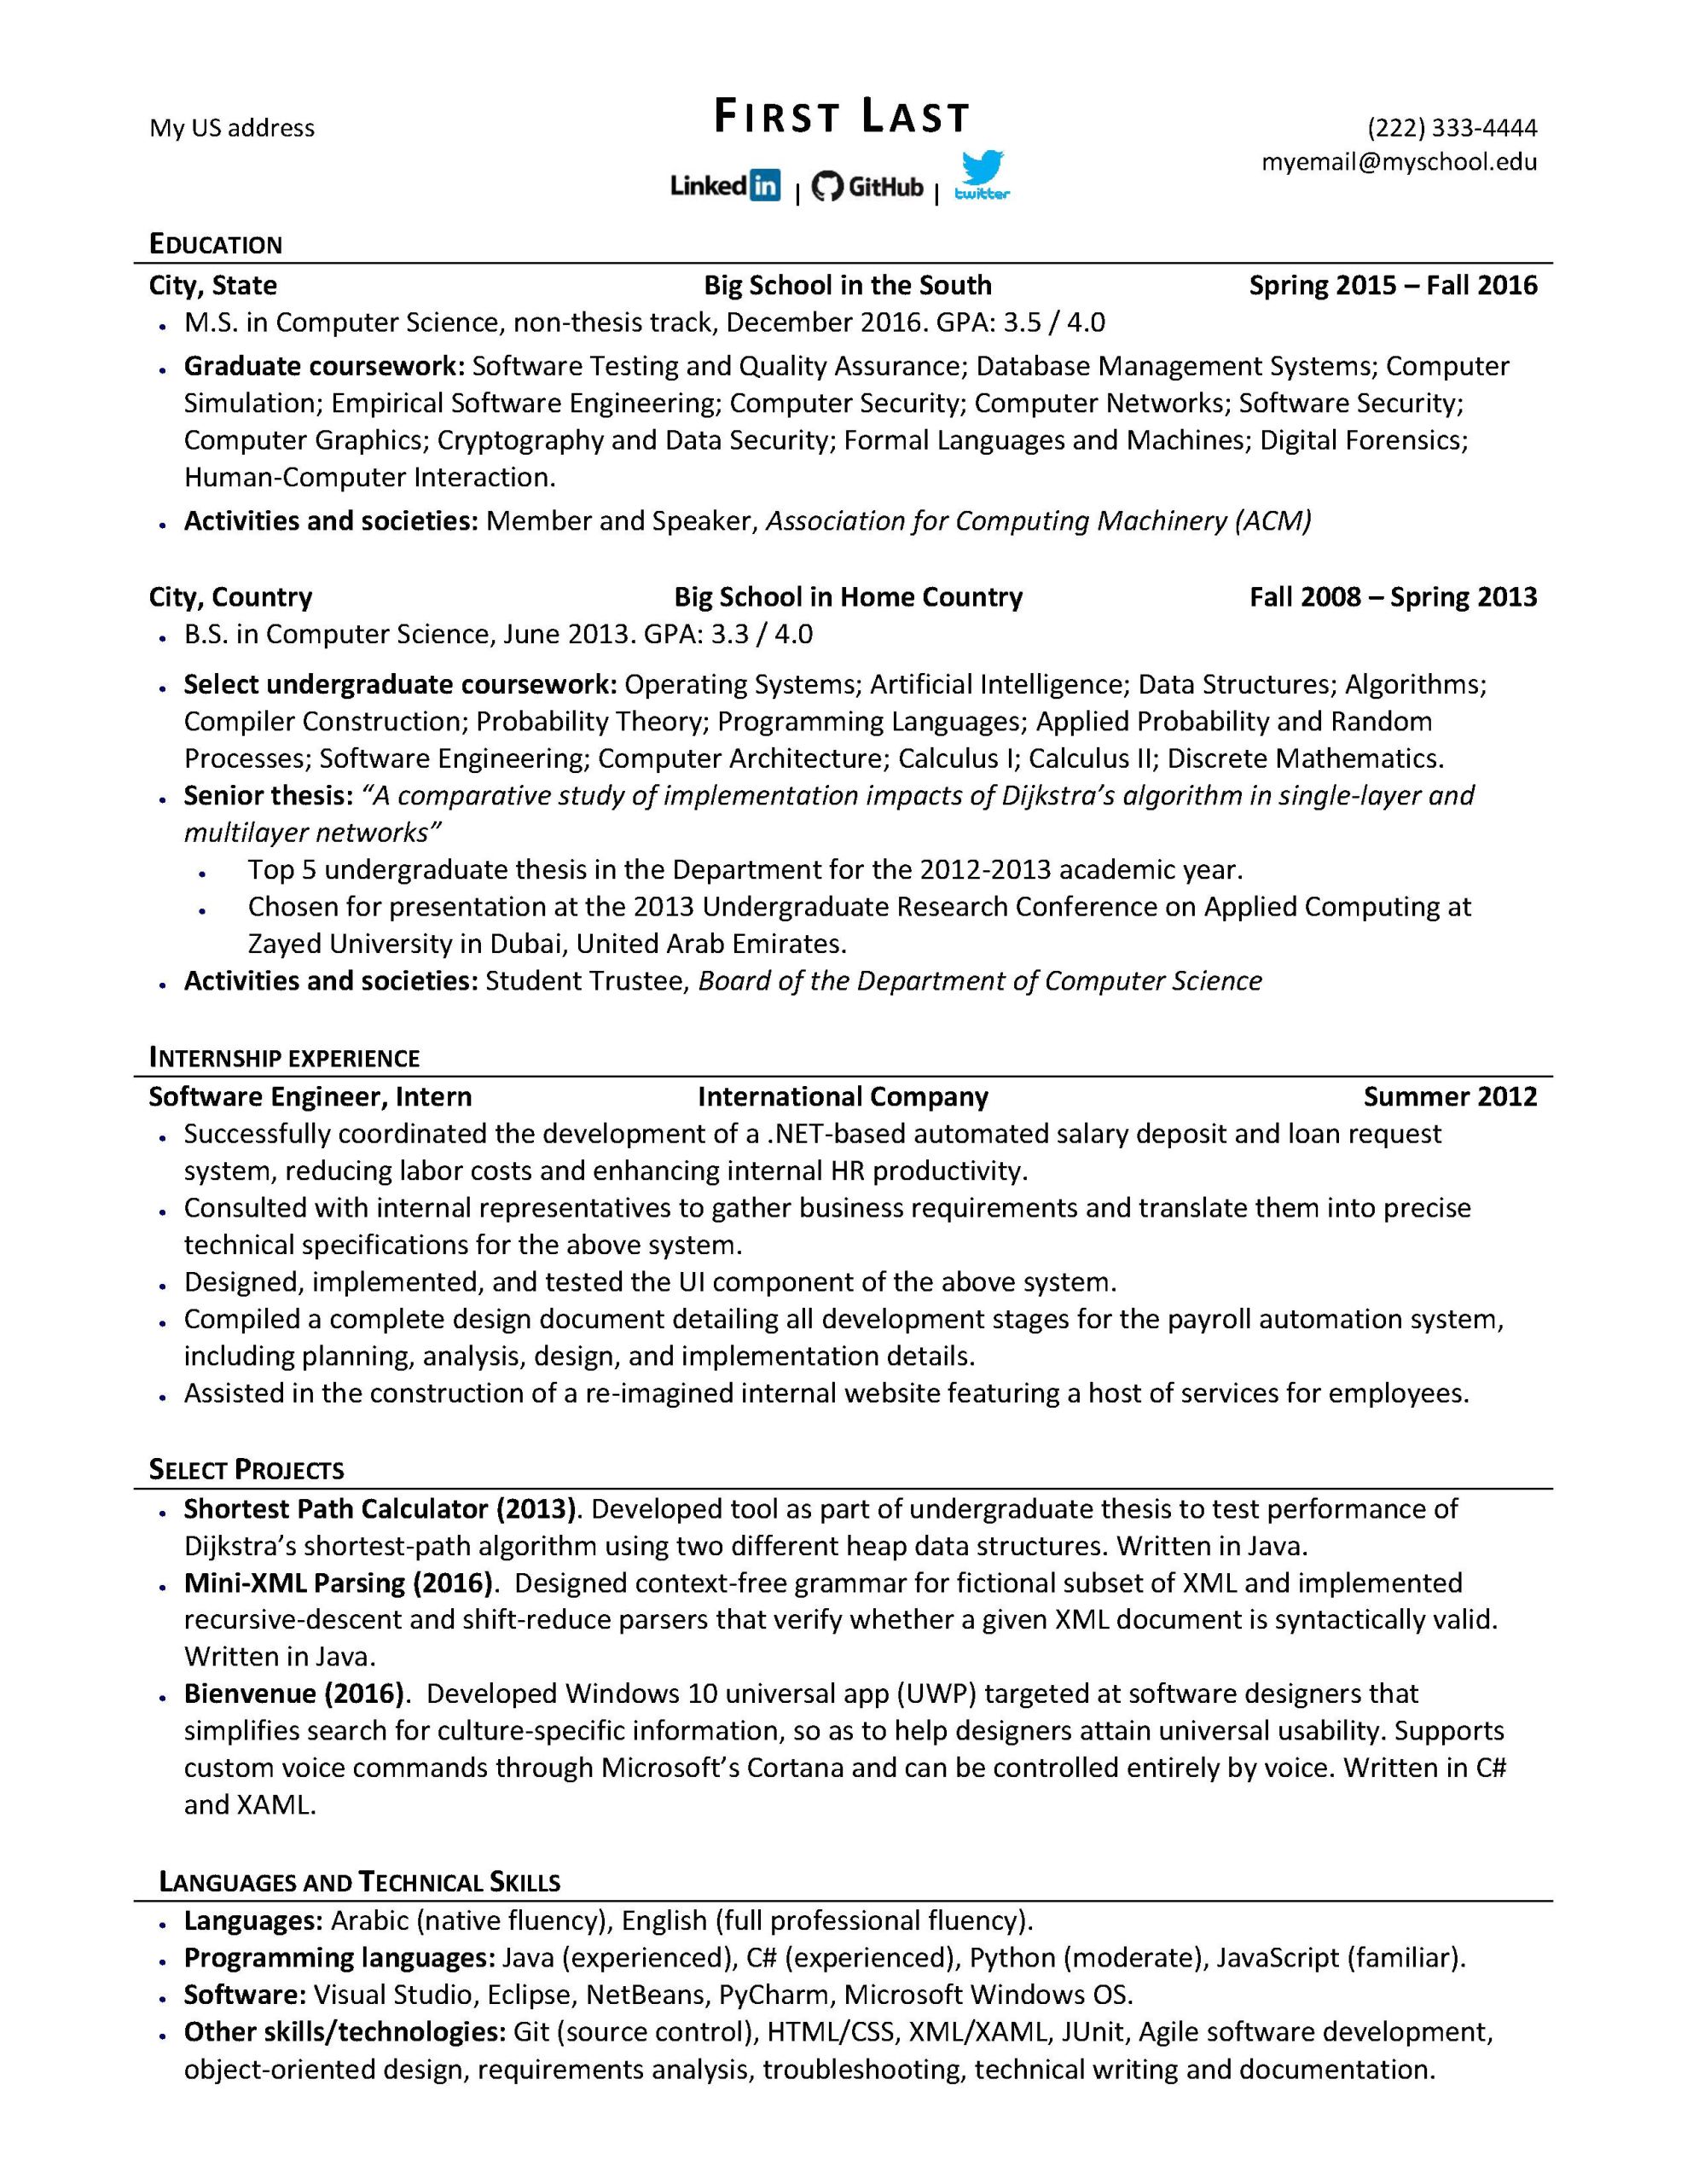 cover letter reddit cscareerquestions 47